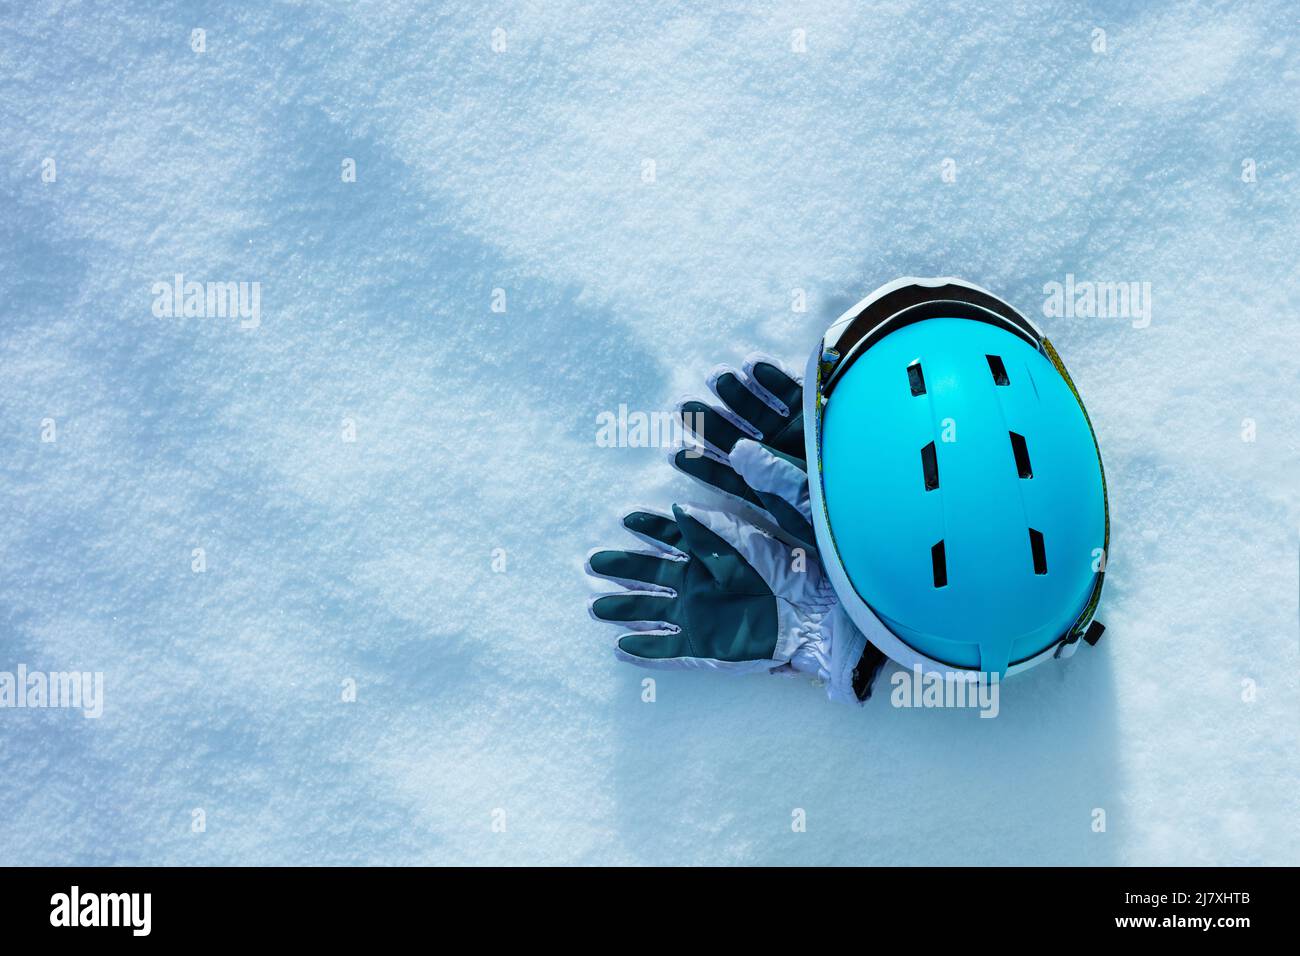 Sport gloves in the snow with blue ski helmet and mask Stock Photo